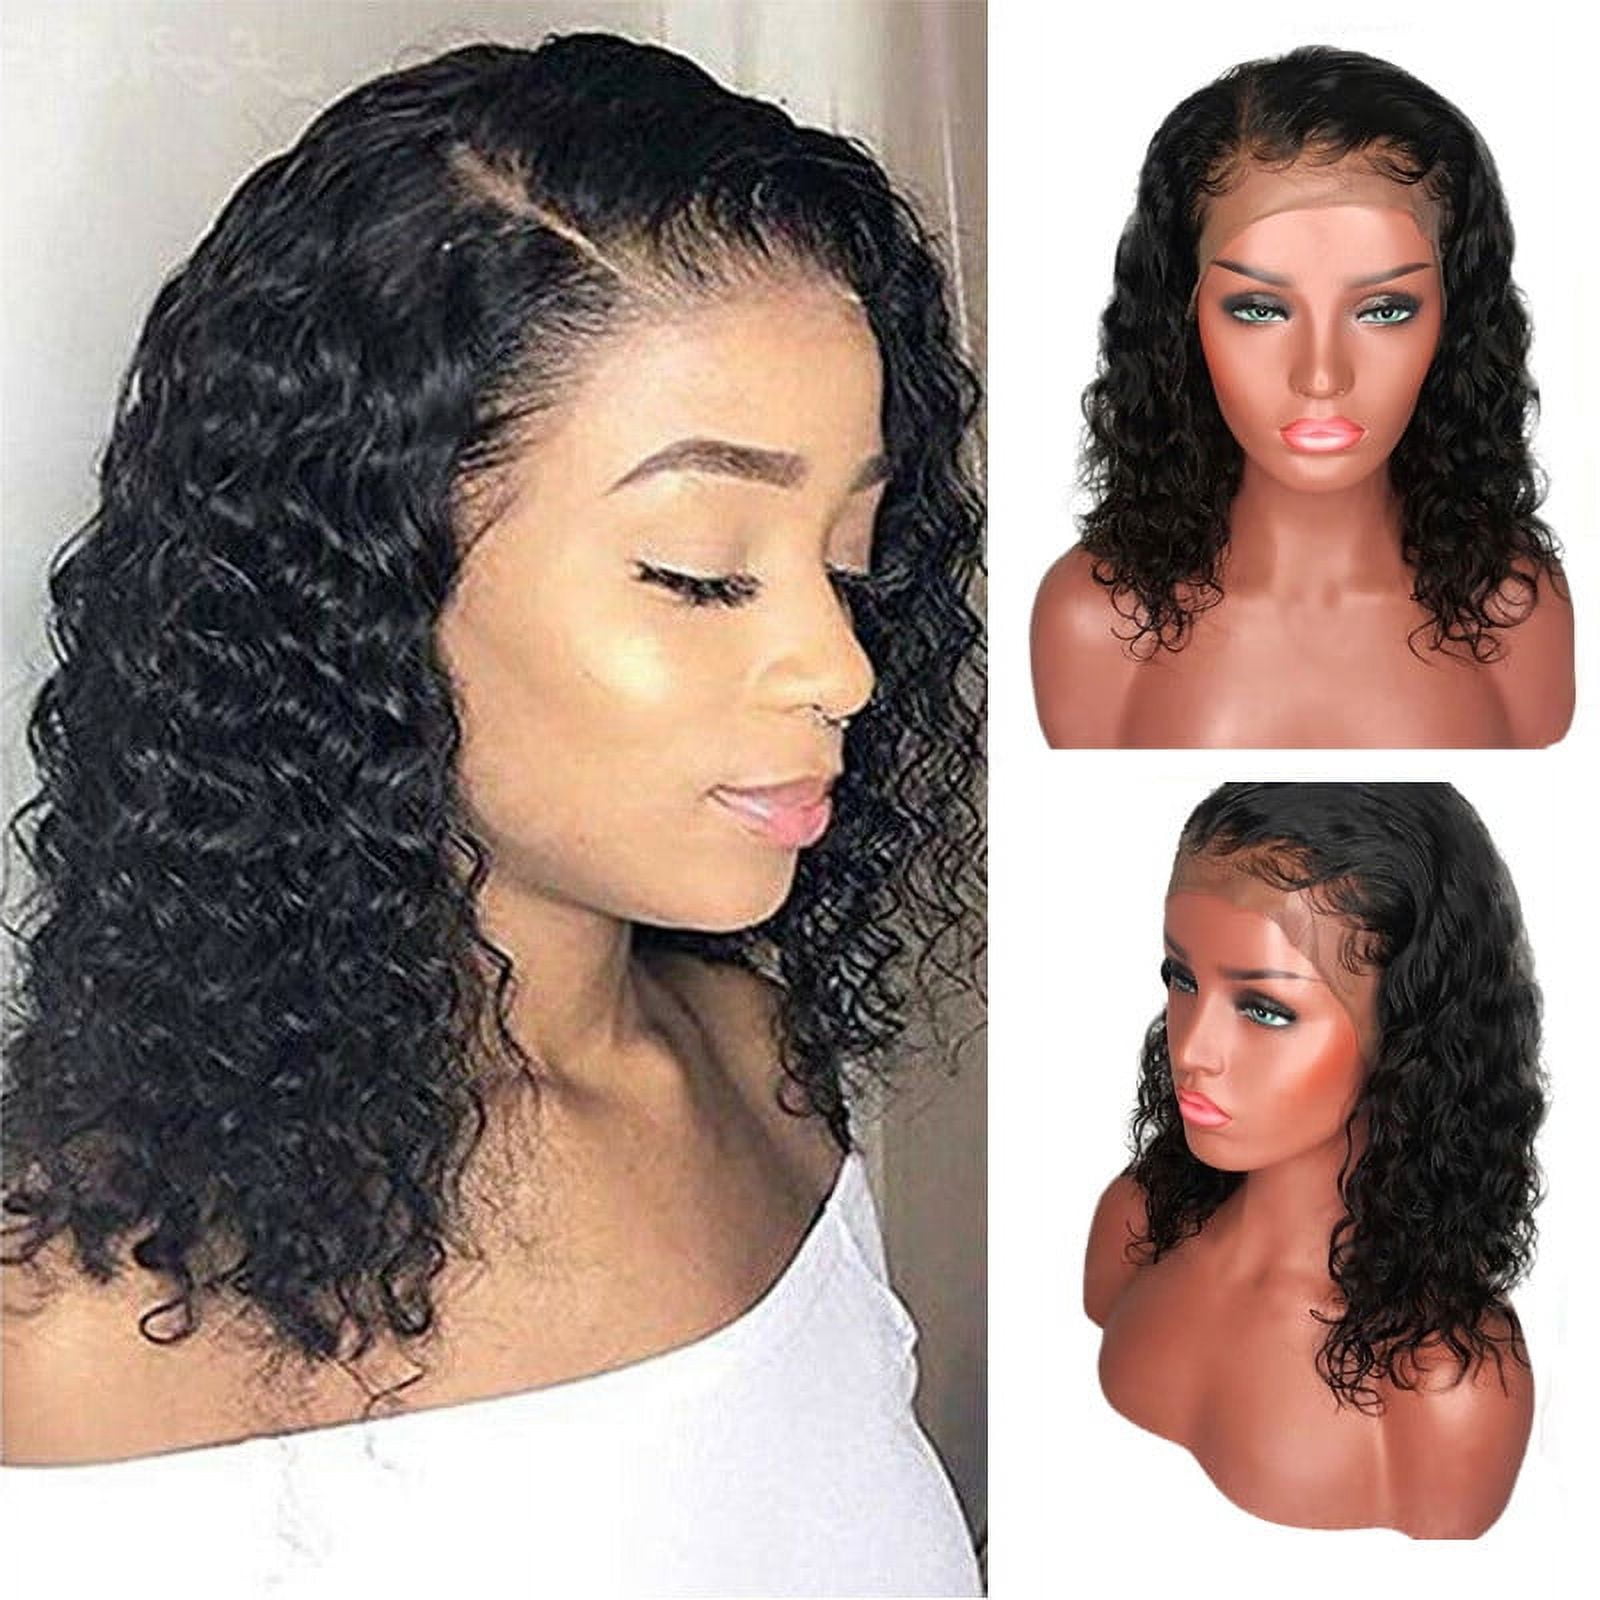 Wig Kit for Lace Frontal Wig Hair Extensions Tool Set for Biginners